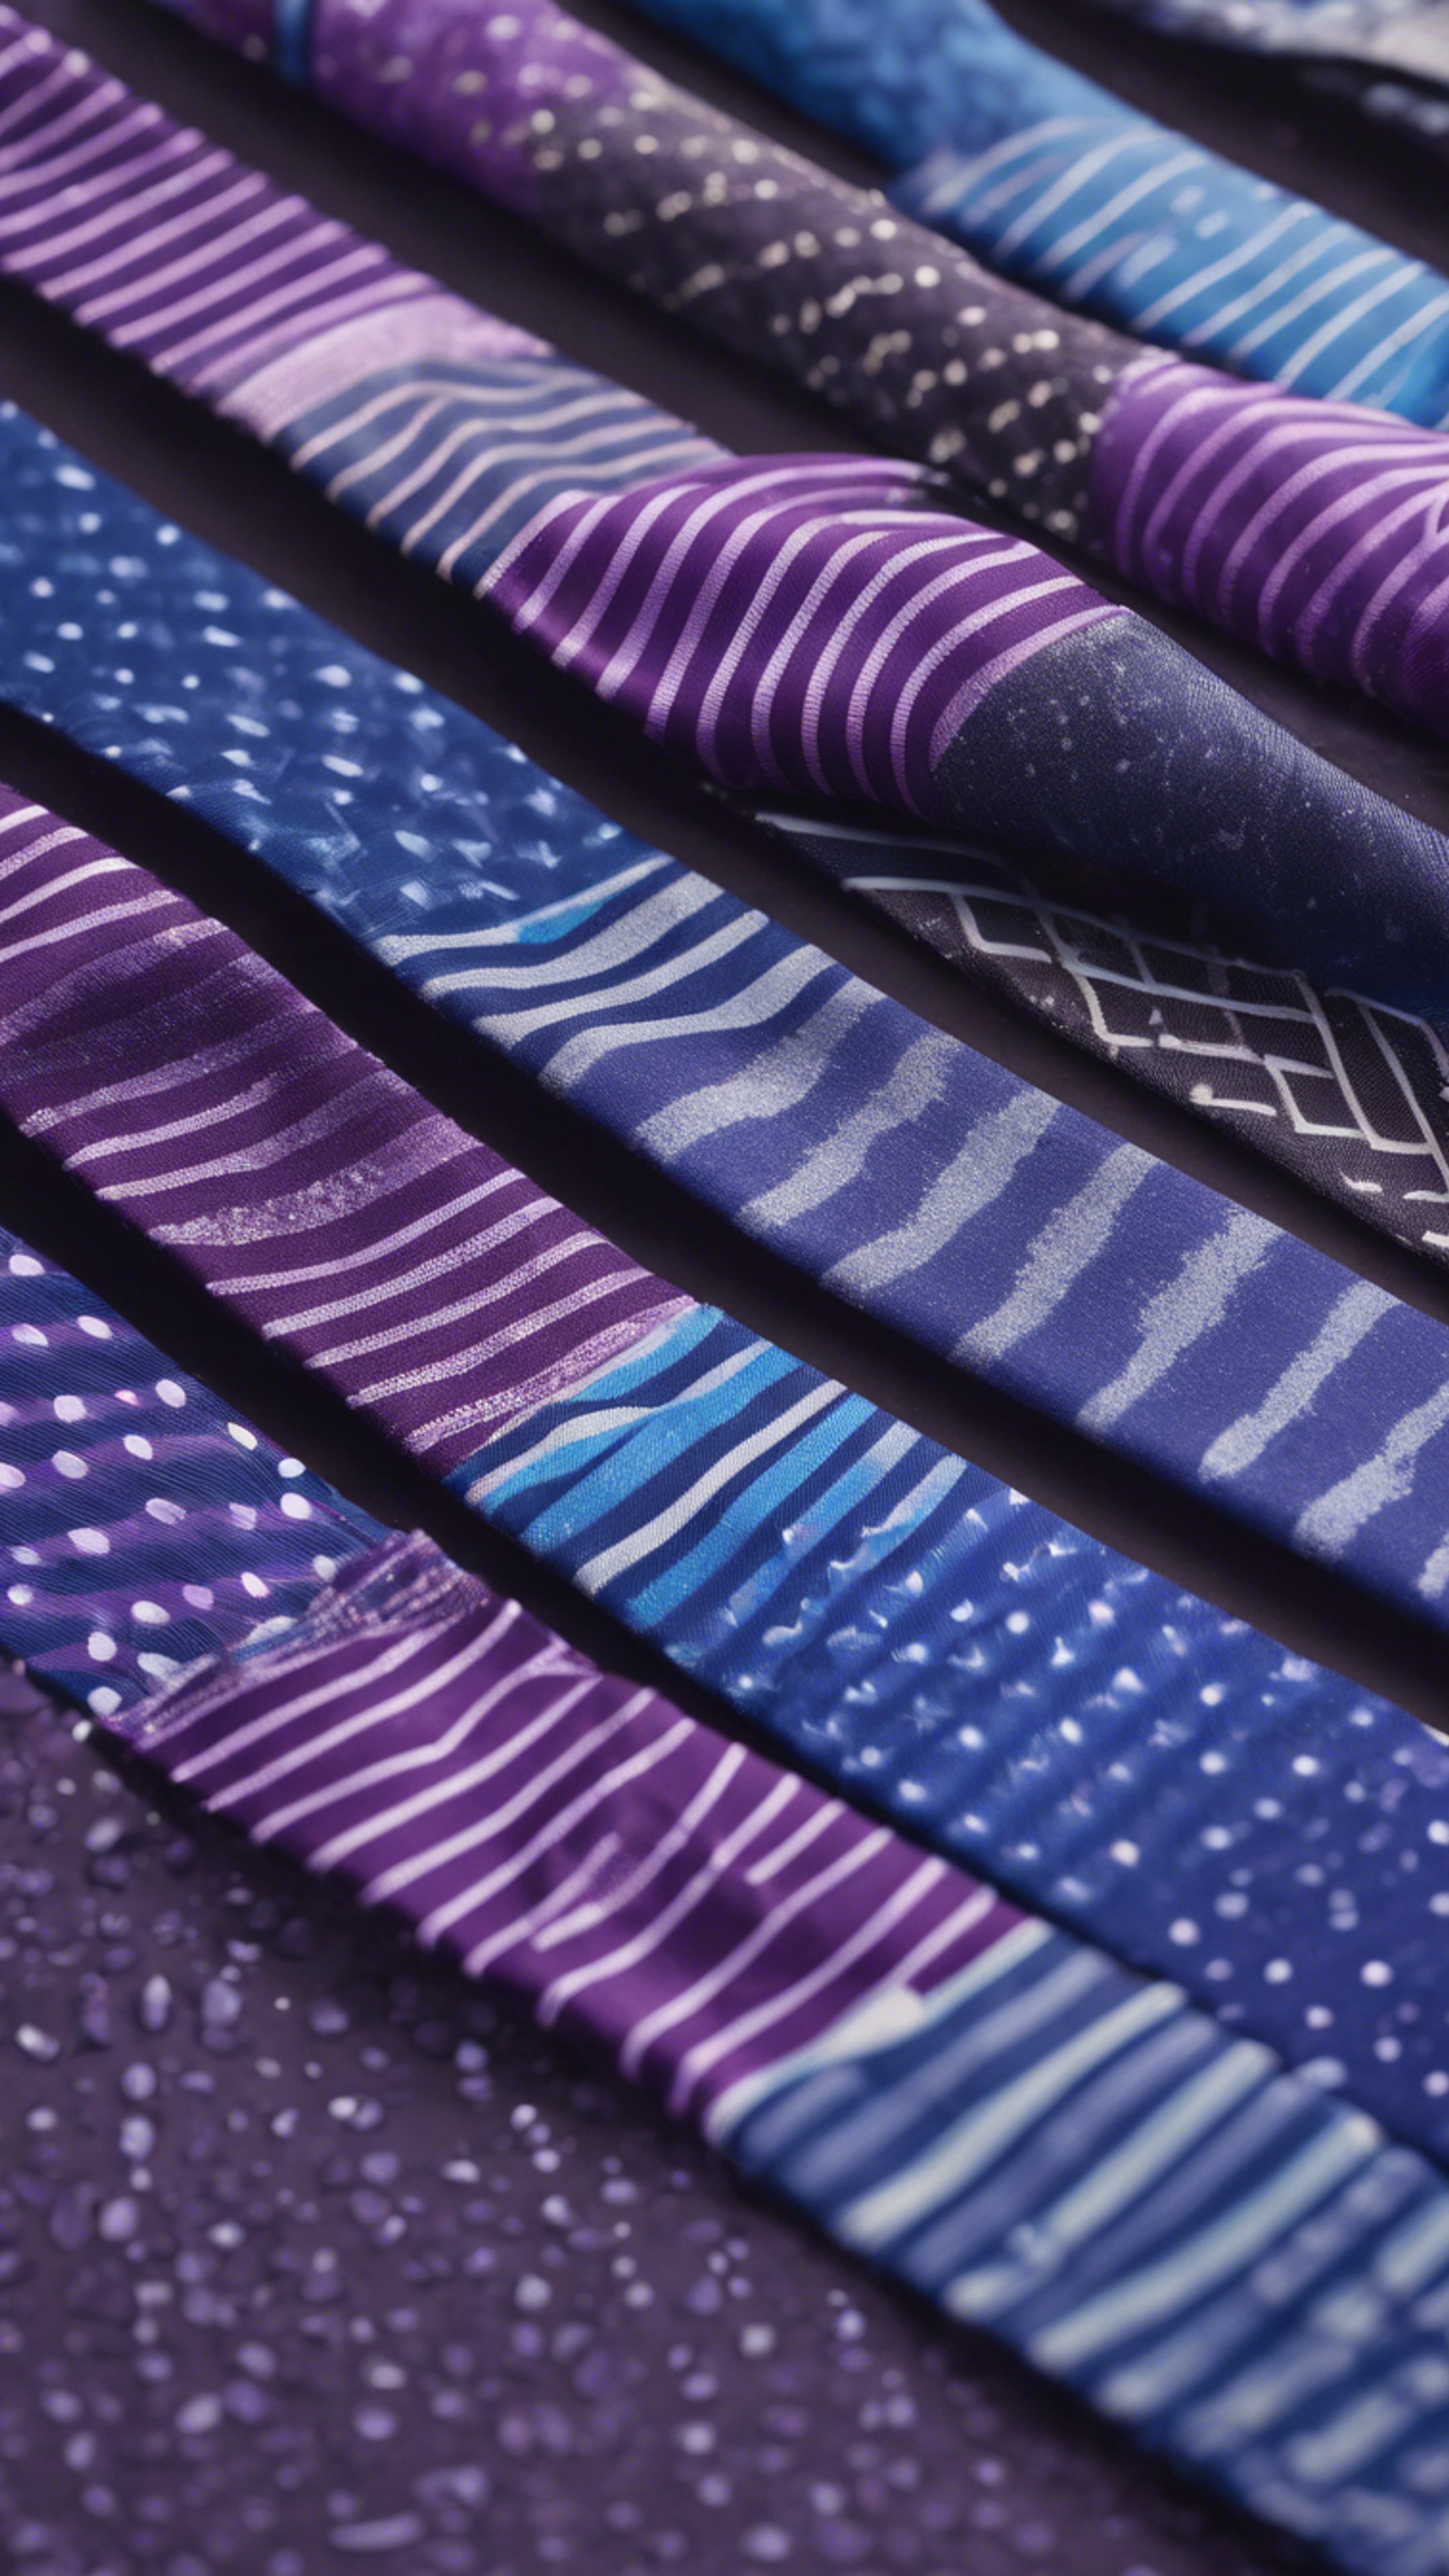 An amusing blend of blue and purple preppy ties diagonally arranged to cover the frame. Wallpaper[cd774b3d264b4506b753]